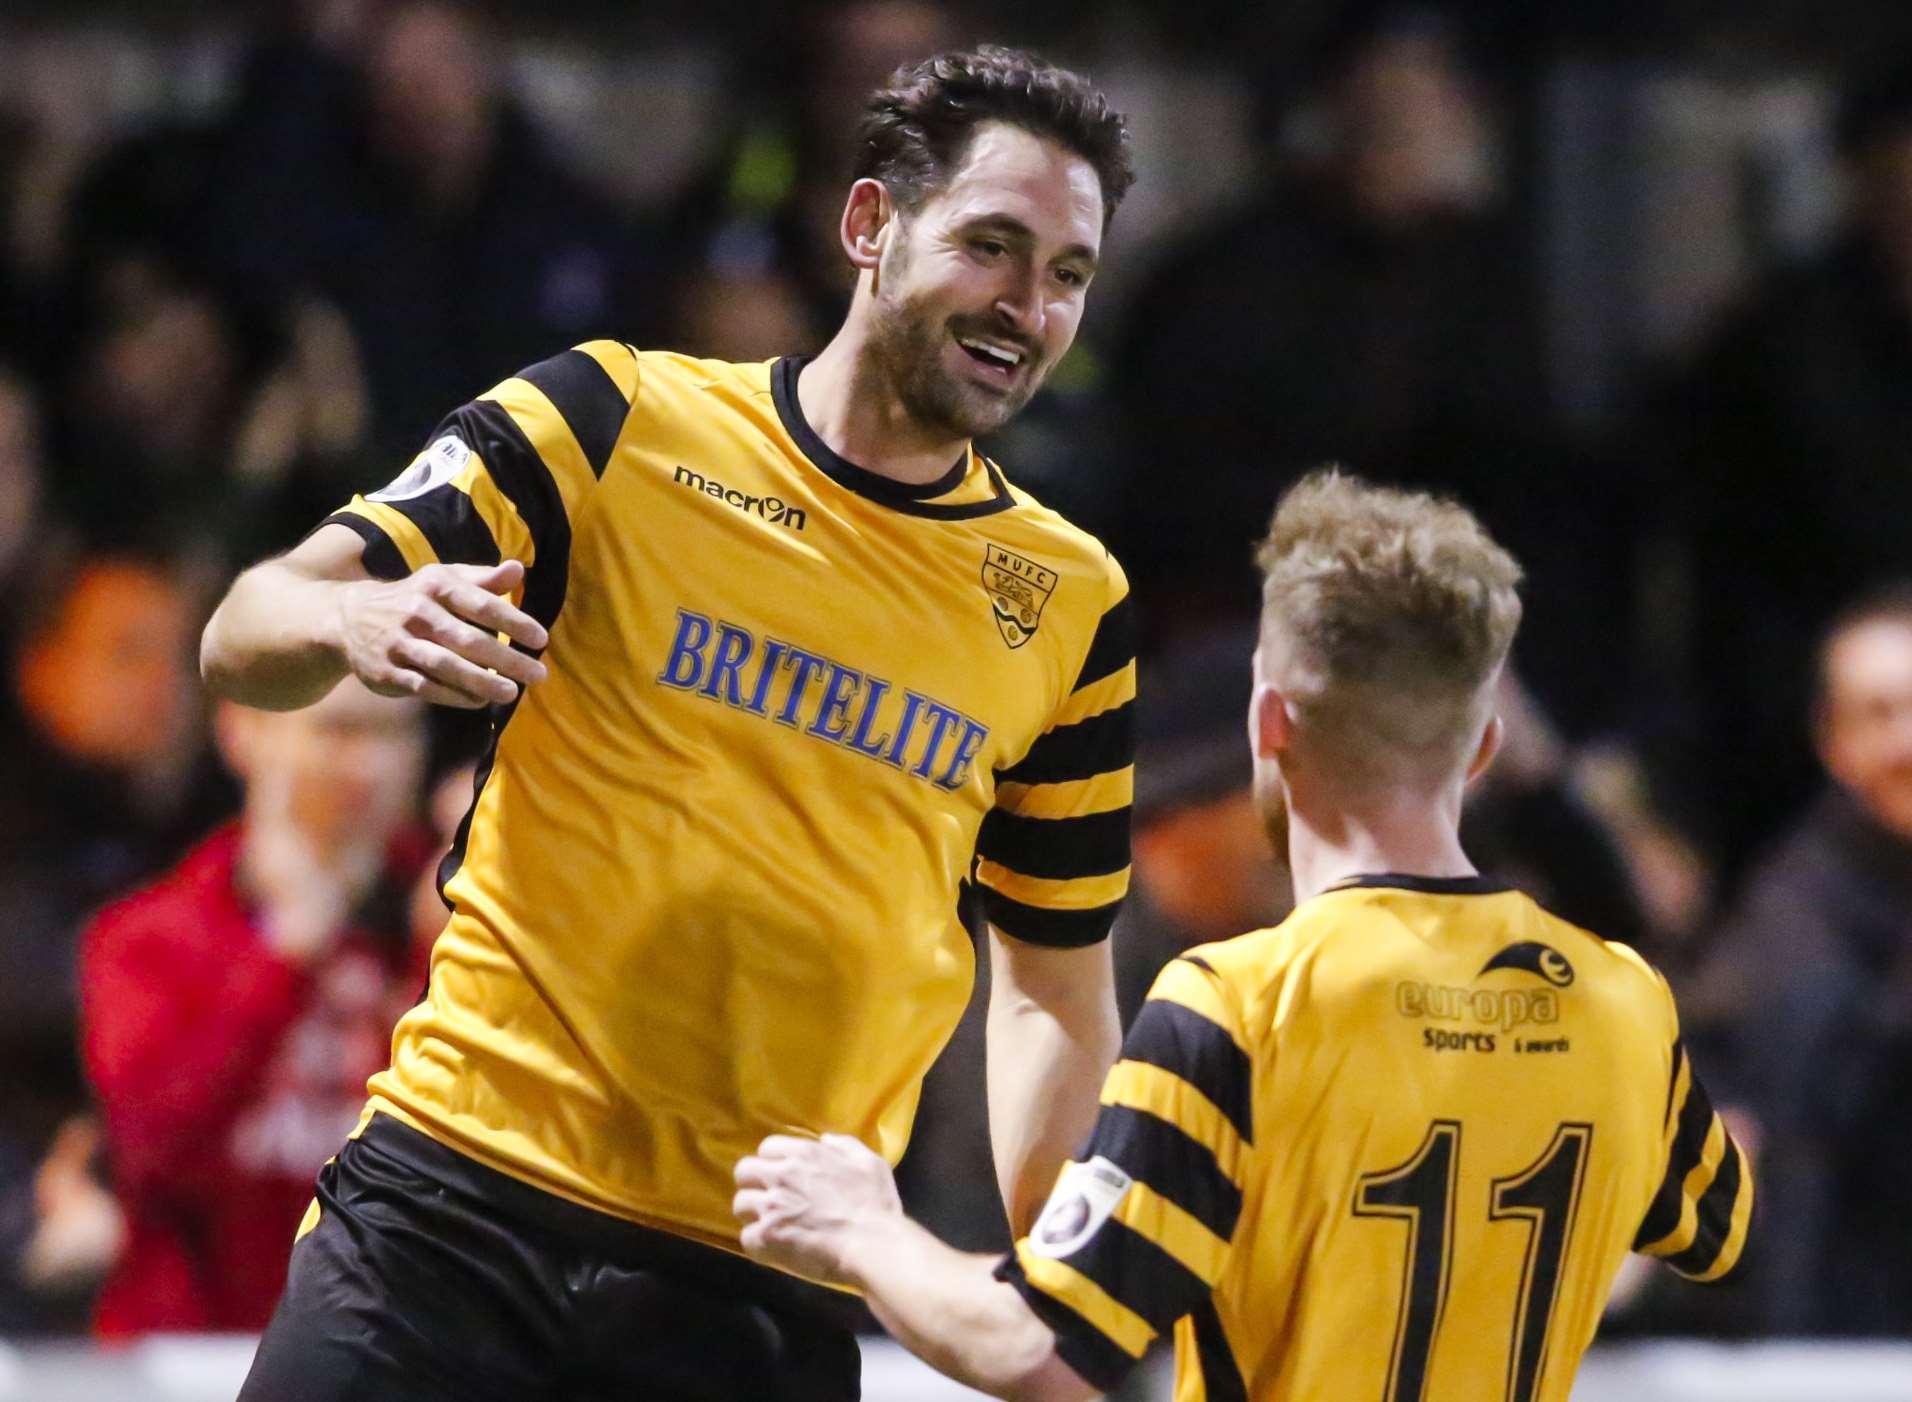 Jay May celebrates one of his many goals for Maidstone Picture: Martin Apps